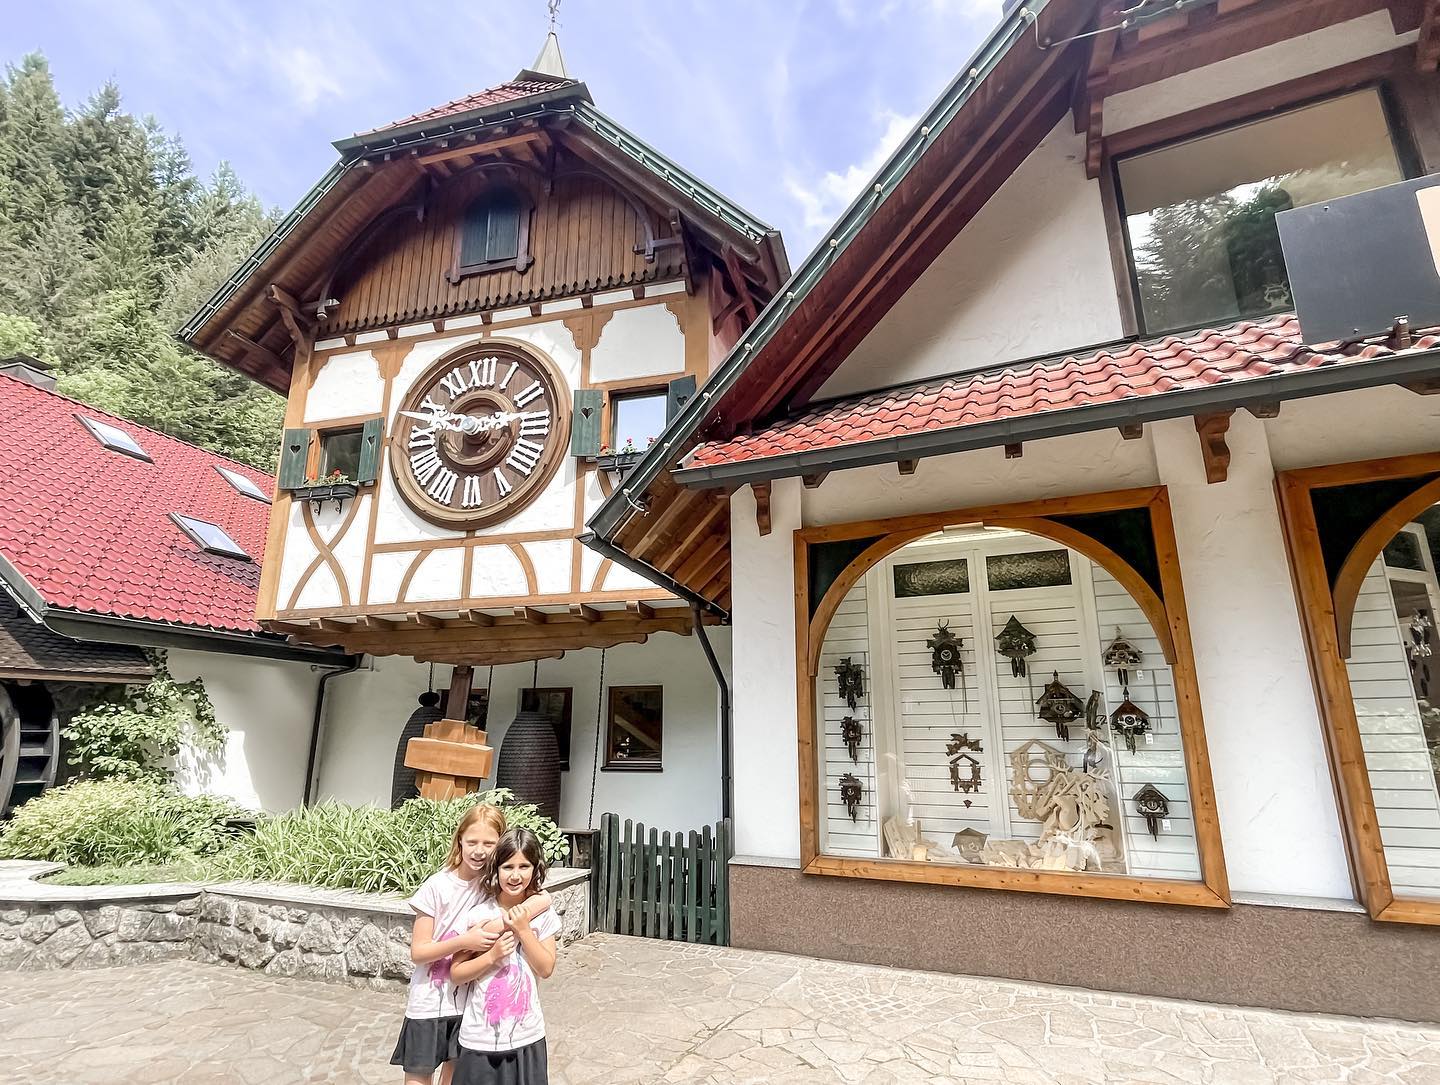 World's Largest Cuckoo Clock - One Day in the Black Forest Itinerary 